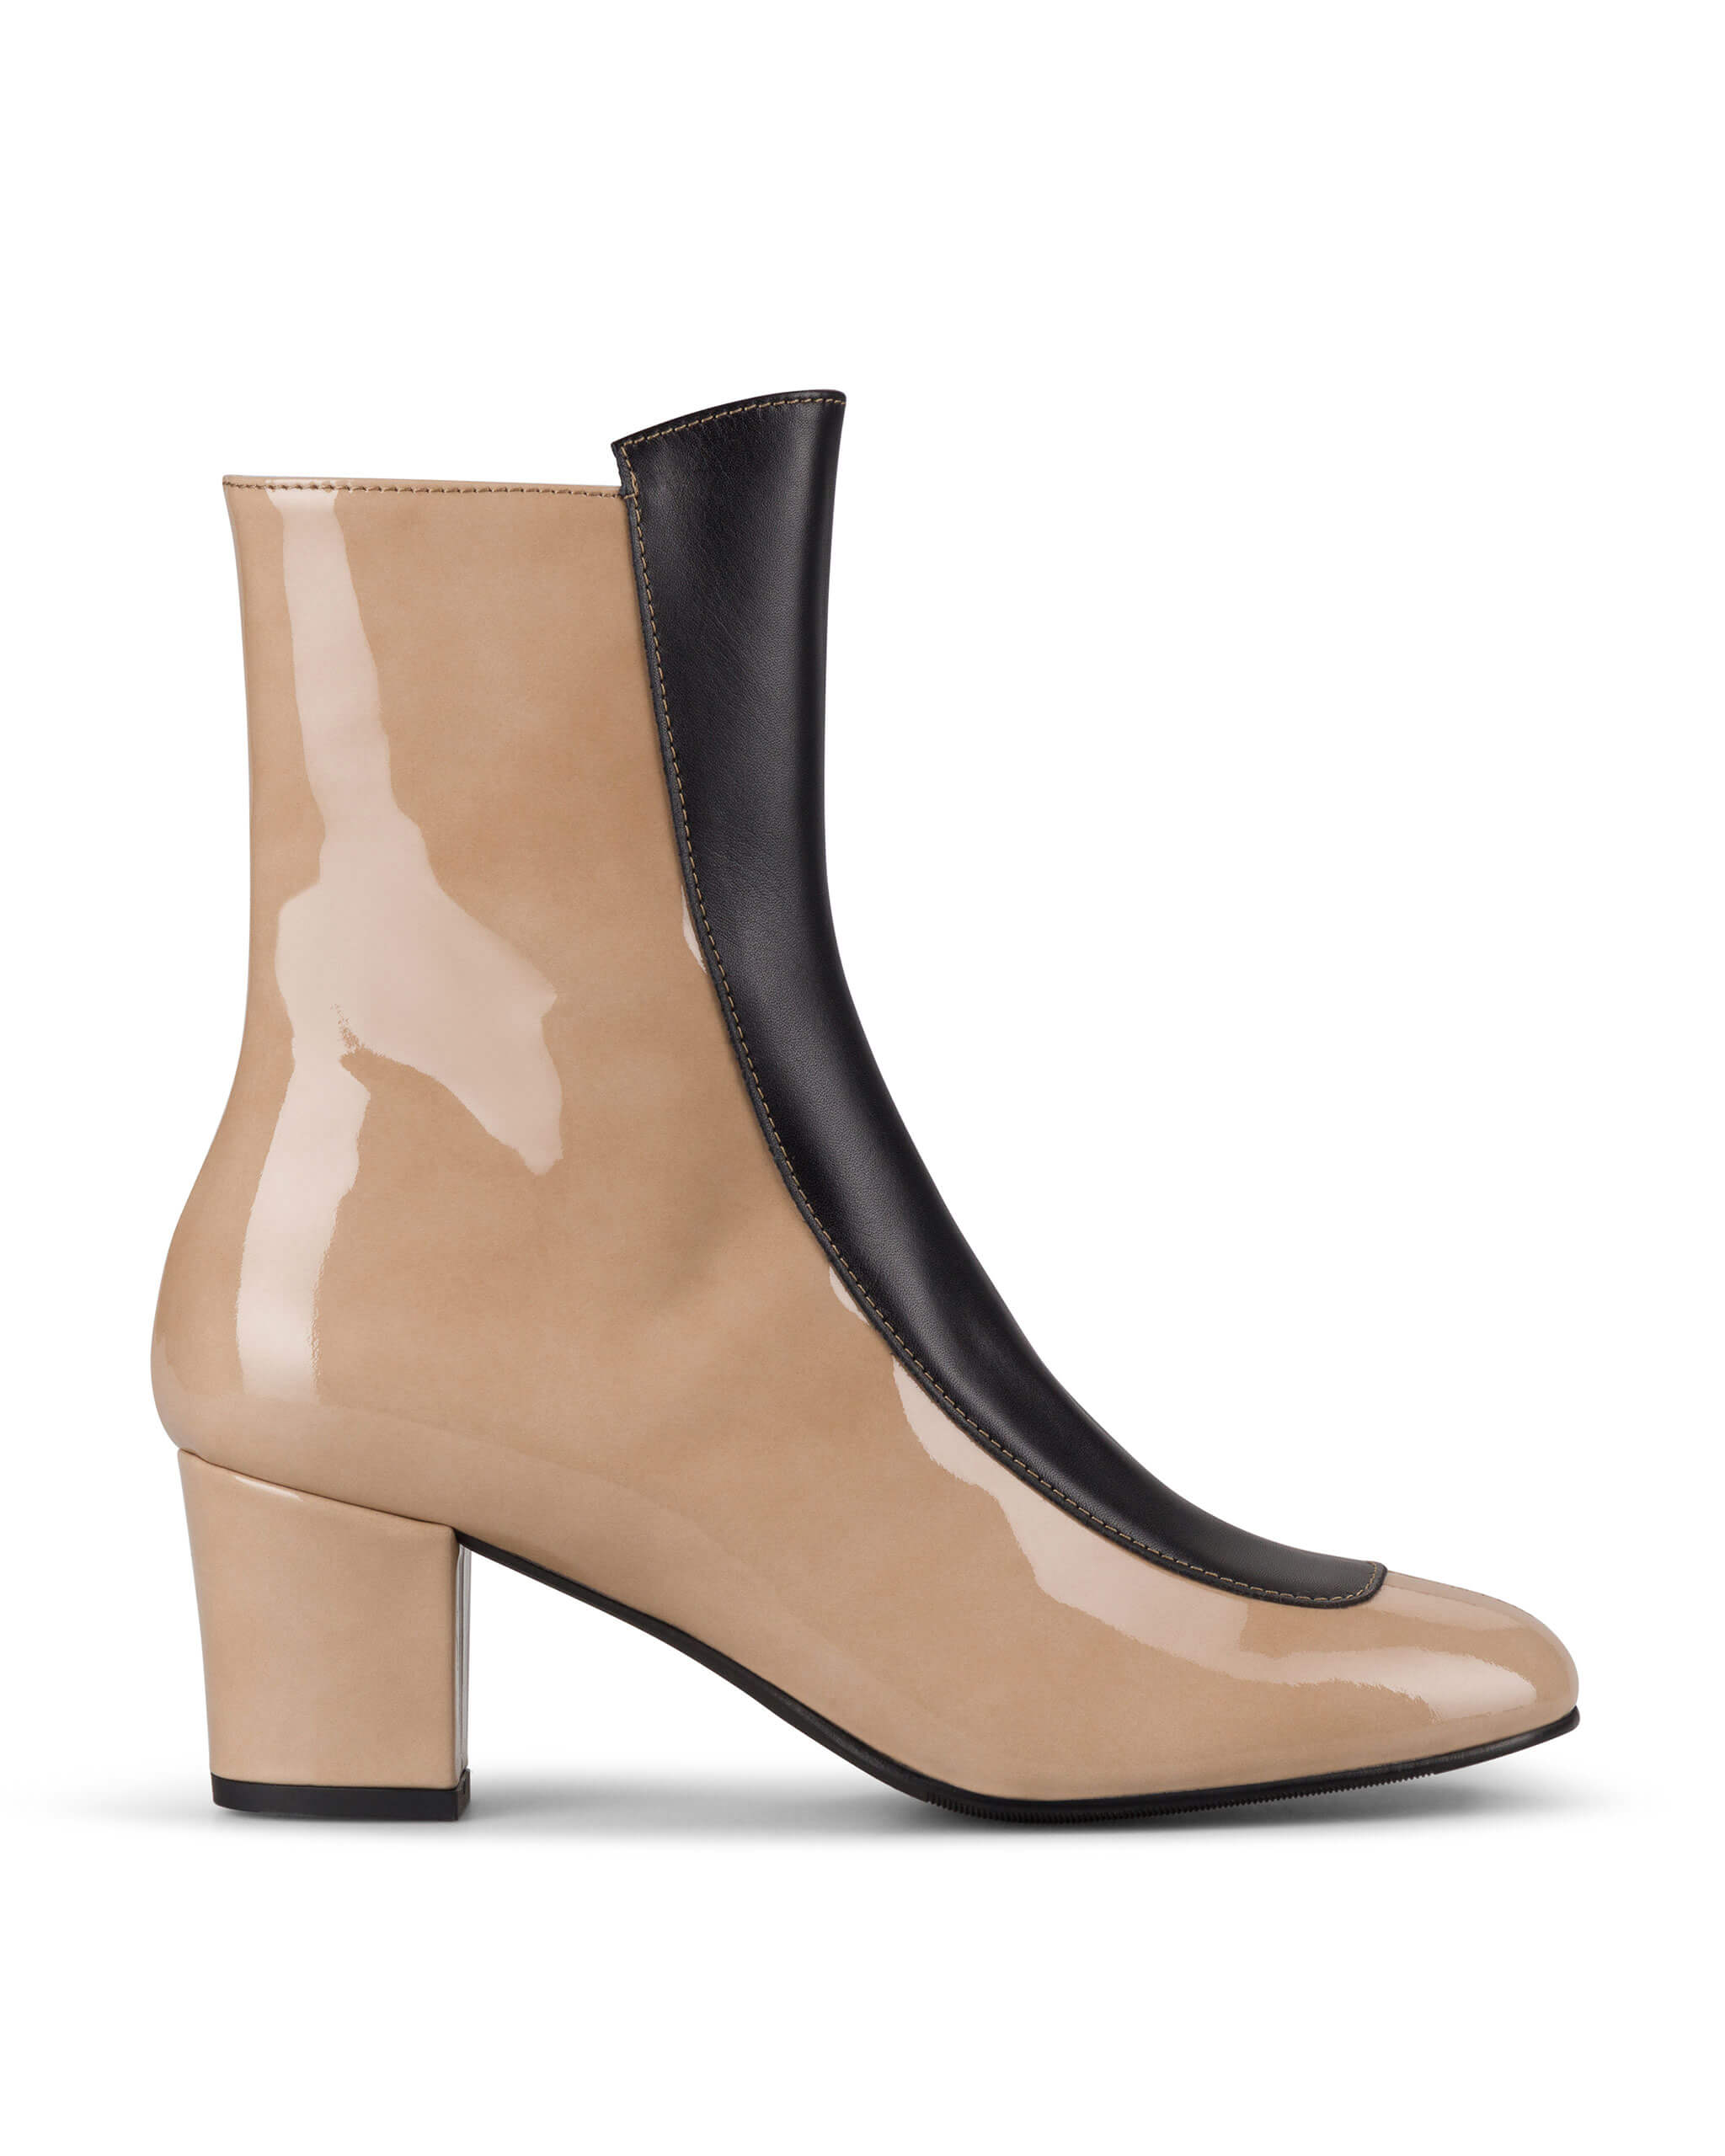 Ops&Ops No16 Sandstone patent leather block-heel boots